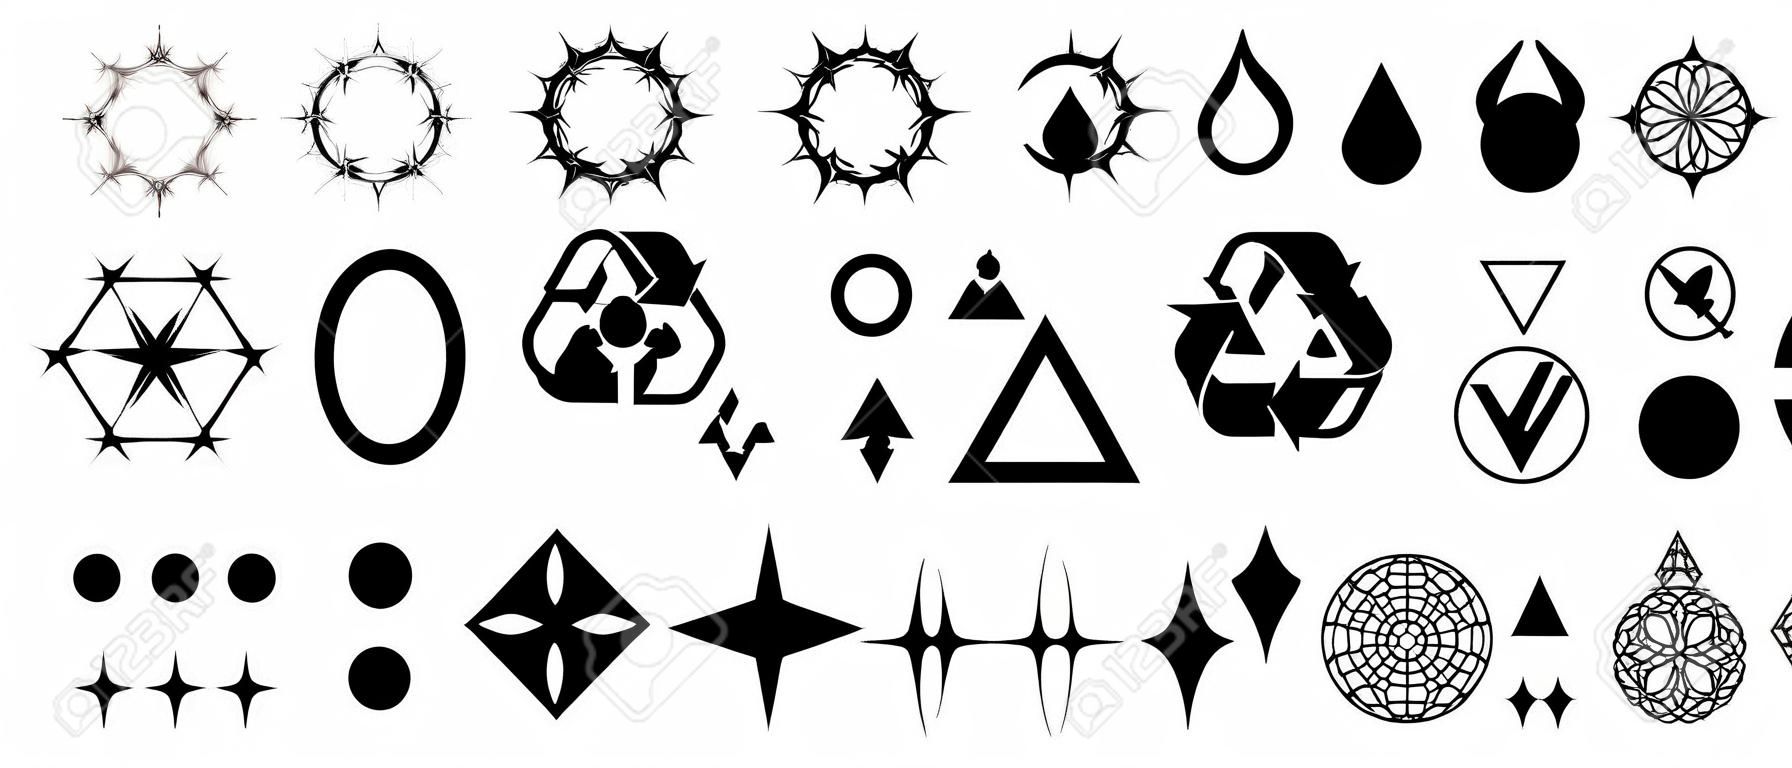 Set of Abstract Trendy Vector Graphic. Collection of Acid Elements. Cool Rave Icons.